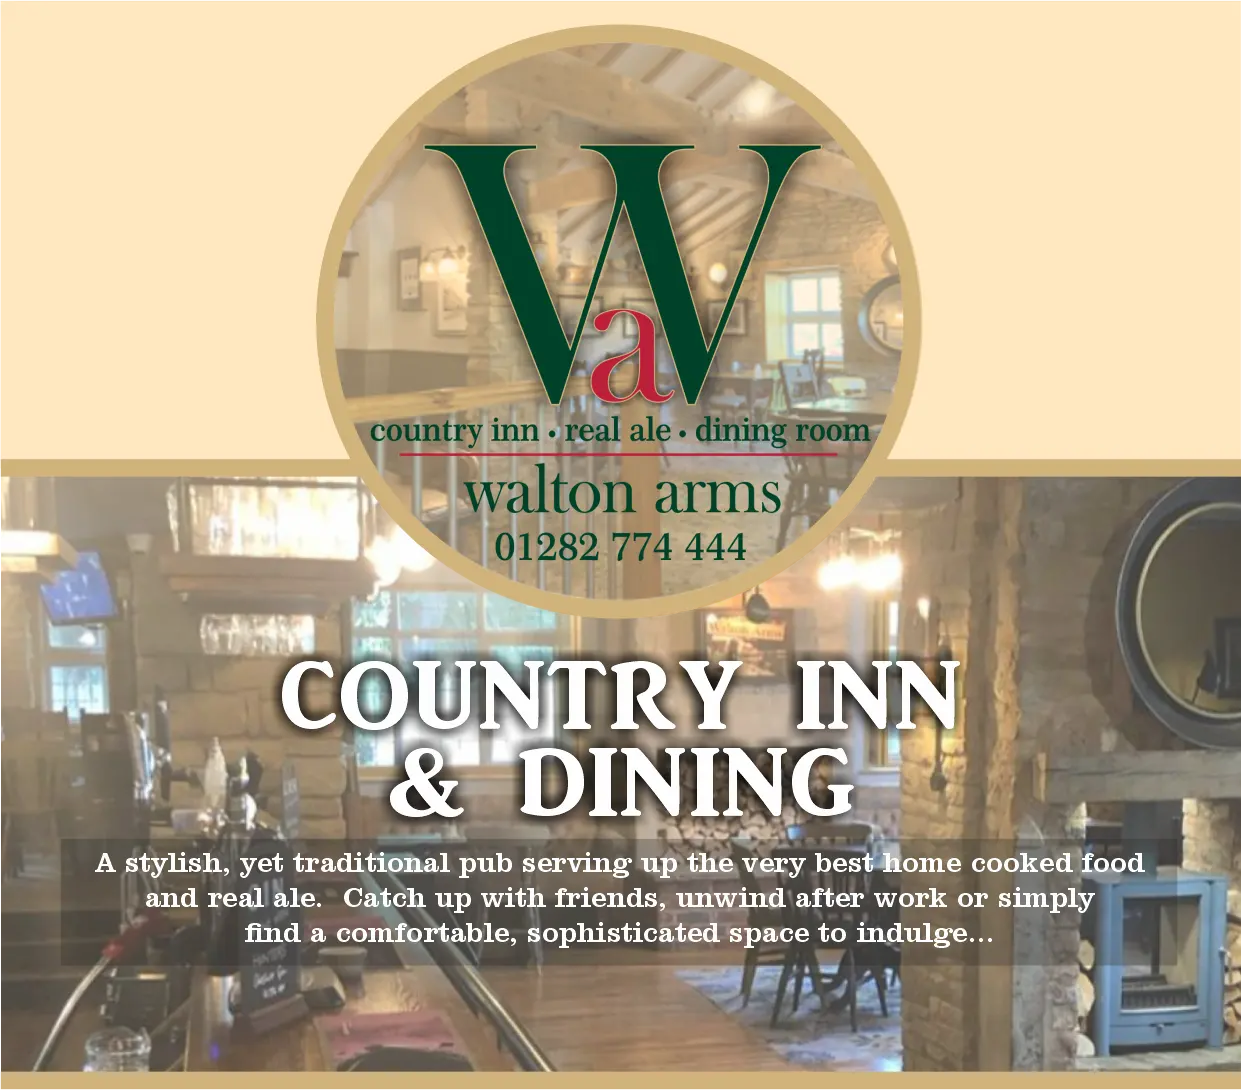 Book your table now at the Walton Arms Country Inn and Dining